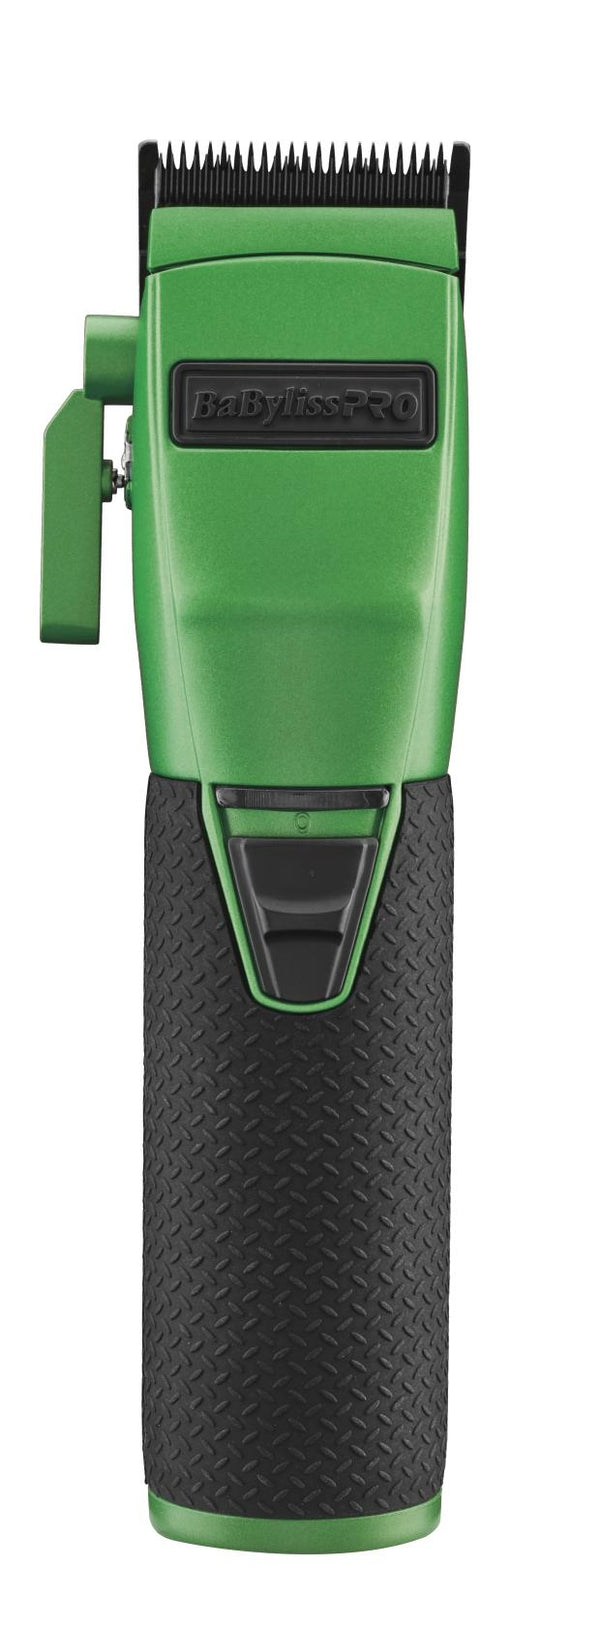 BaByliss PRO Boost FX Green Cordless Clipper - Limited Edition Influencer Collection - Patty Cuts (FX870GI) - [PRE-ORDER]